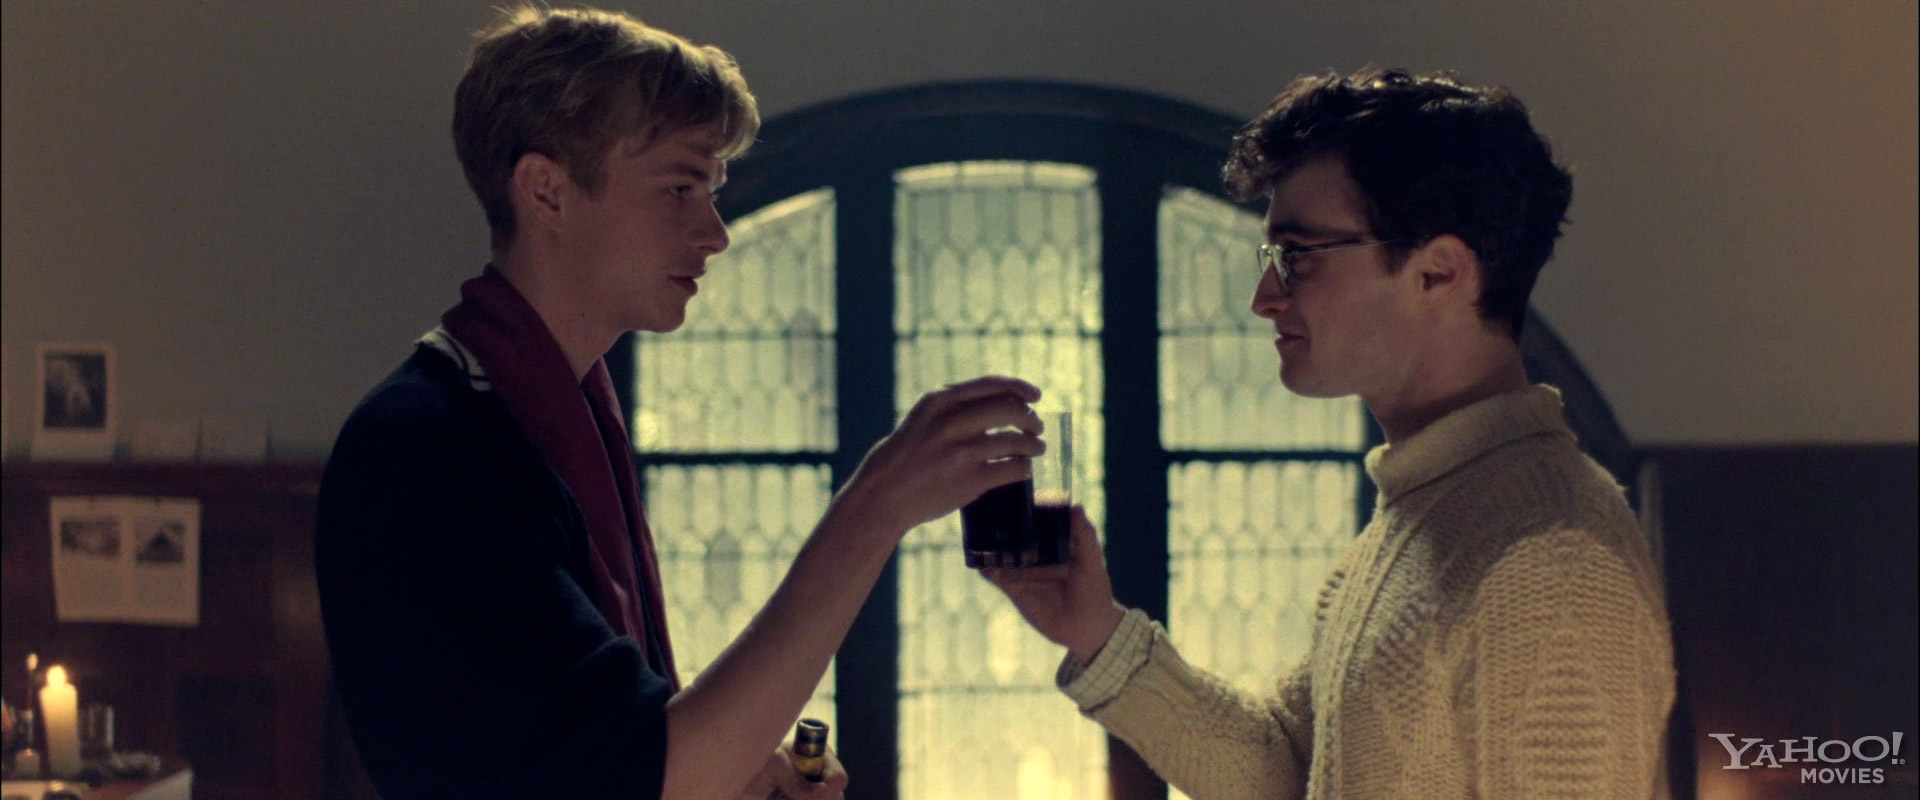 for KILL YOUR DARLINGS with Daniel Radcliffe